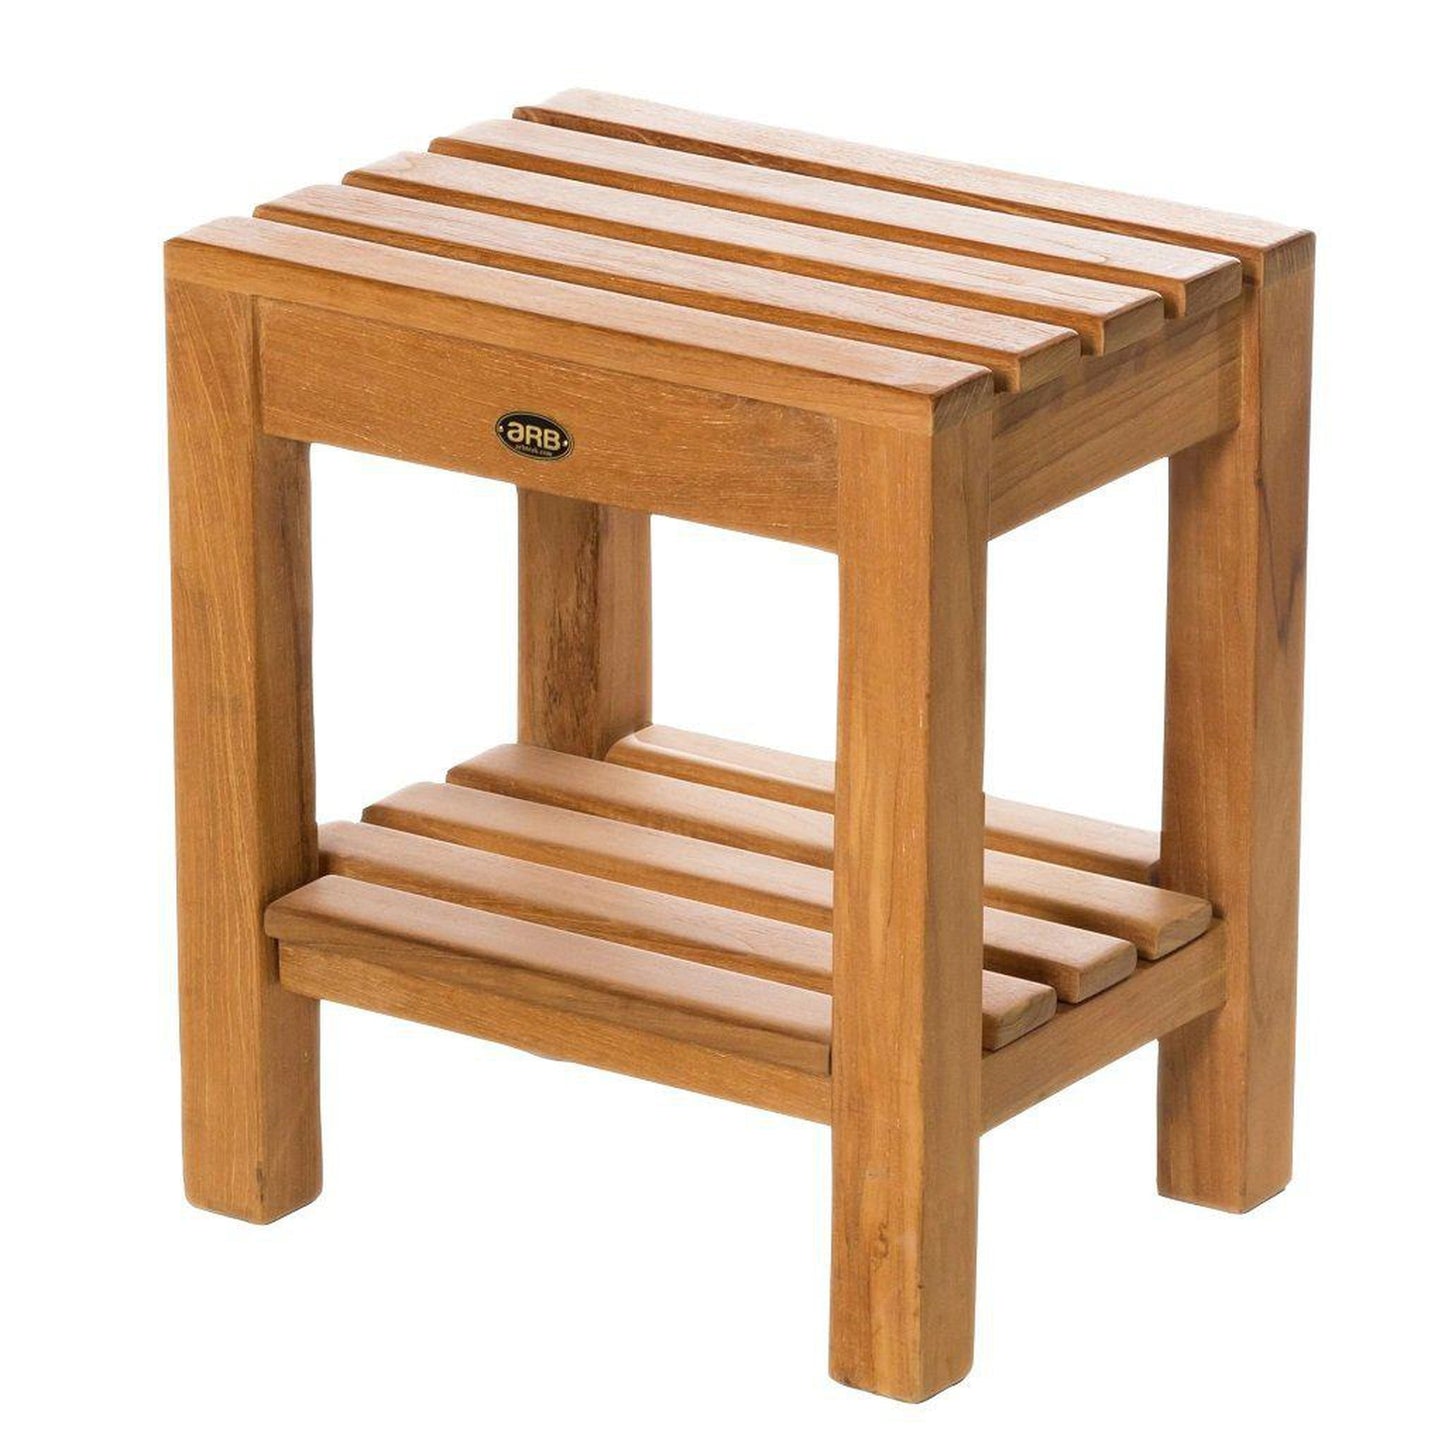 ARB Teak & Specialties Coach 16" Solid Teak Wood Shower Bench With Removable Shelf